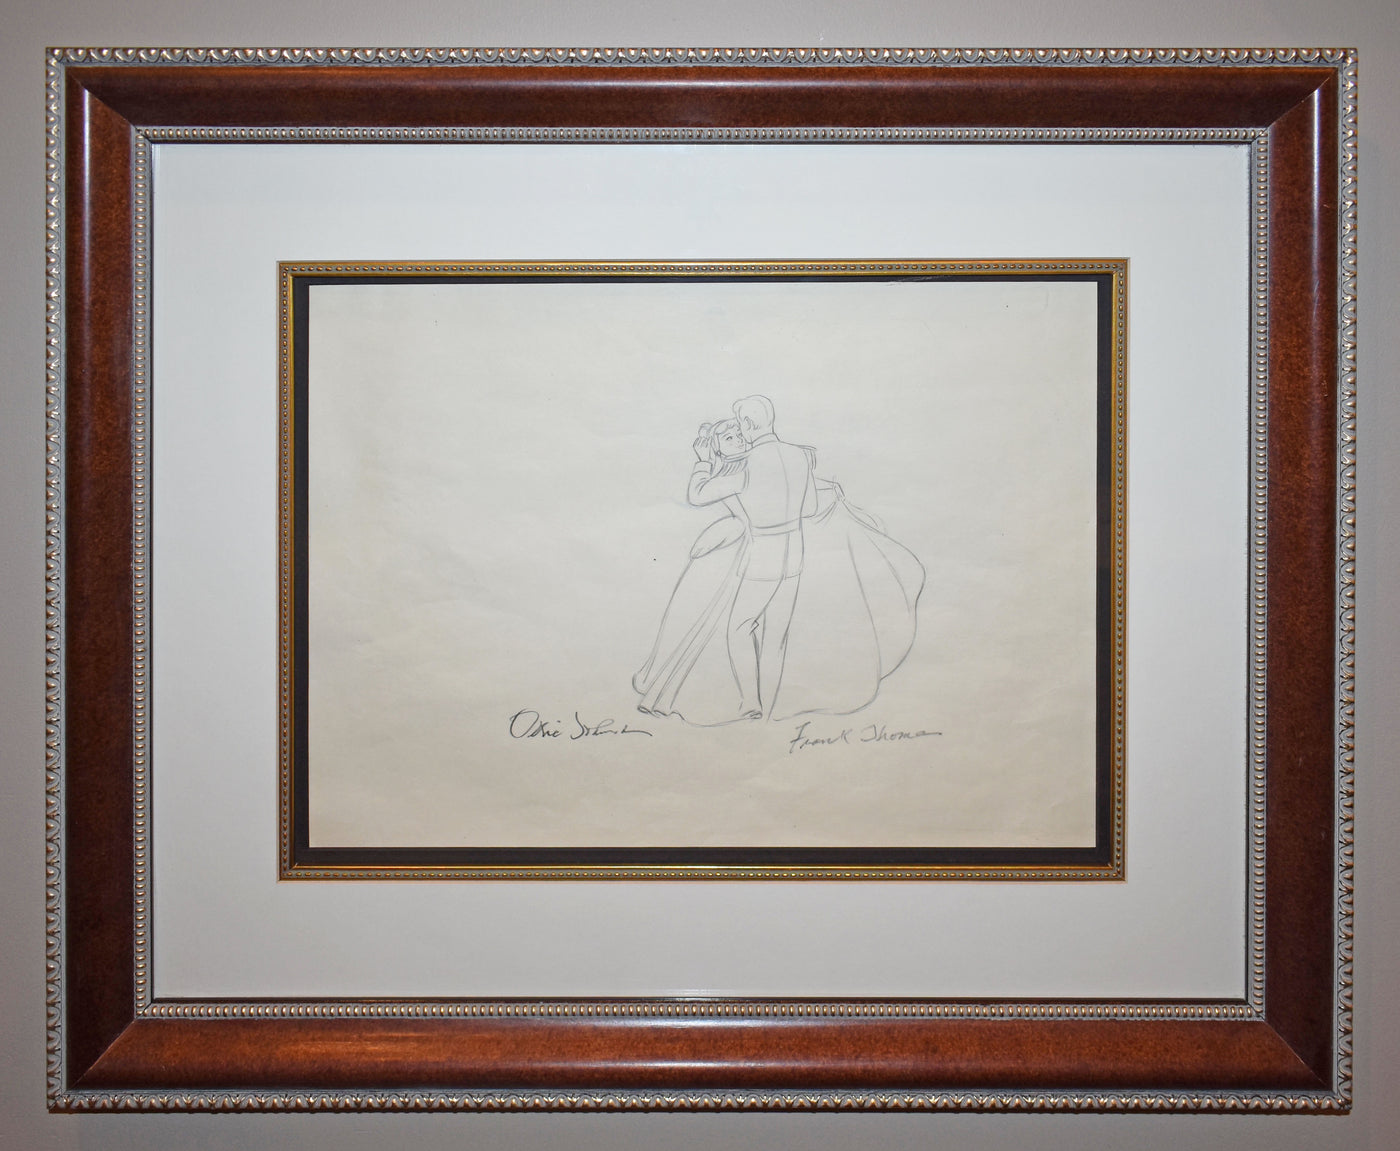 Original Walt Disney Cinderella Production Drawing featuring Cinderella and Prince Charming, Signed by Frank Thomas and Ollie Johnston